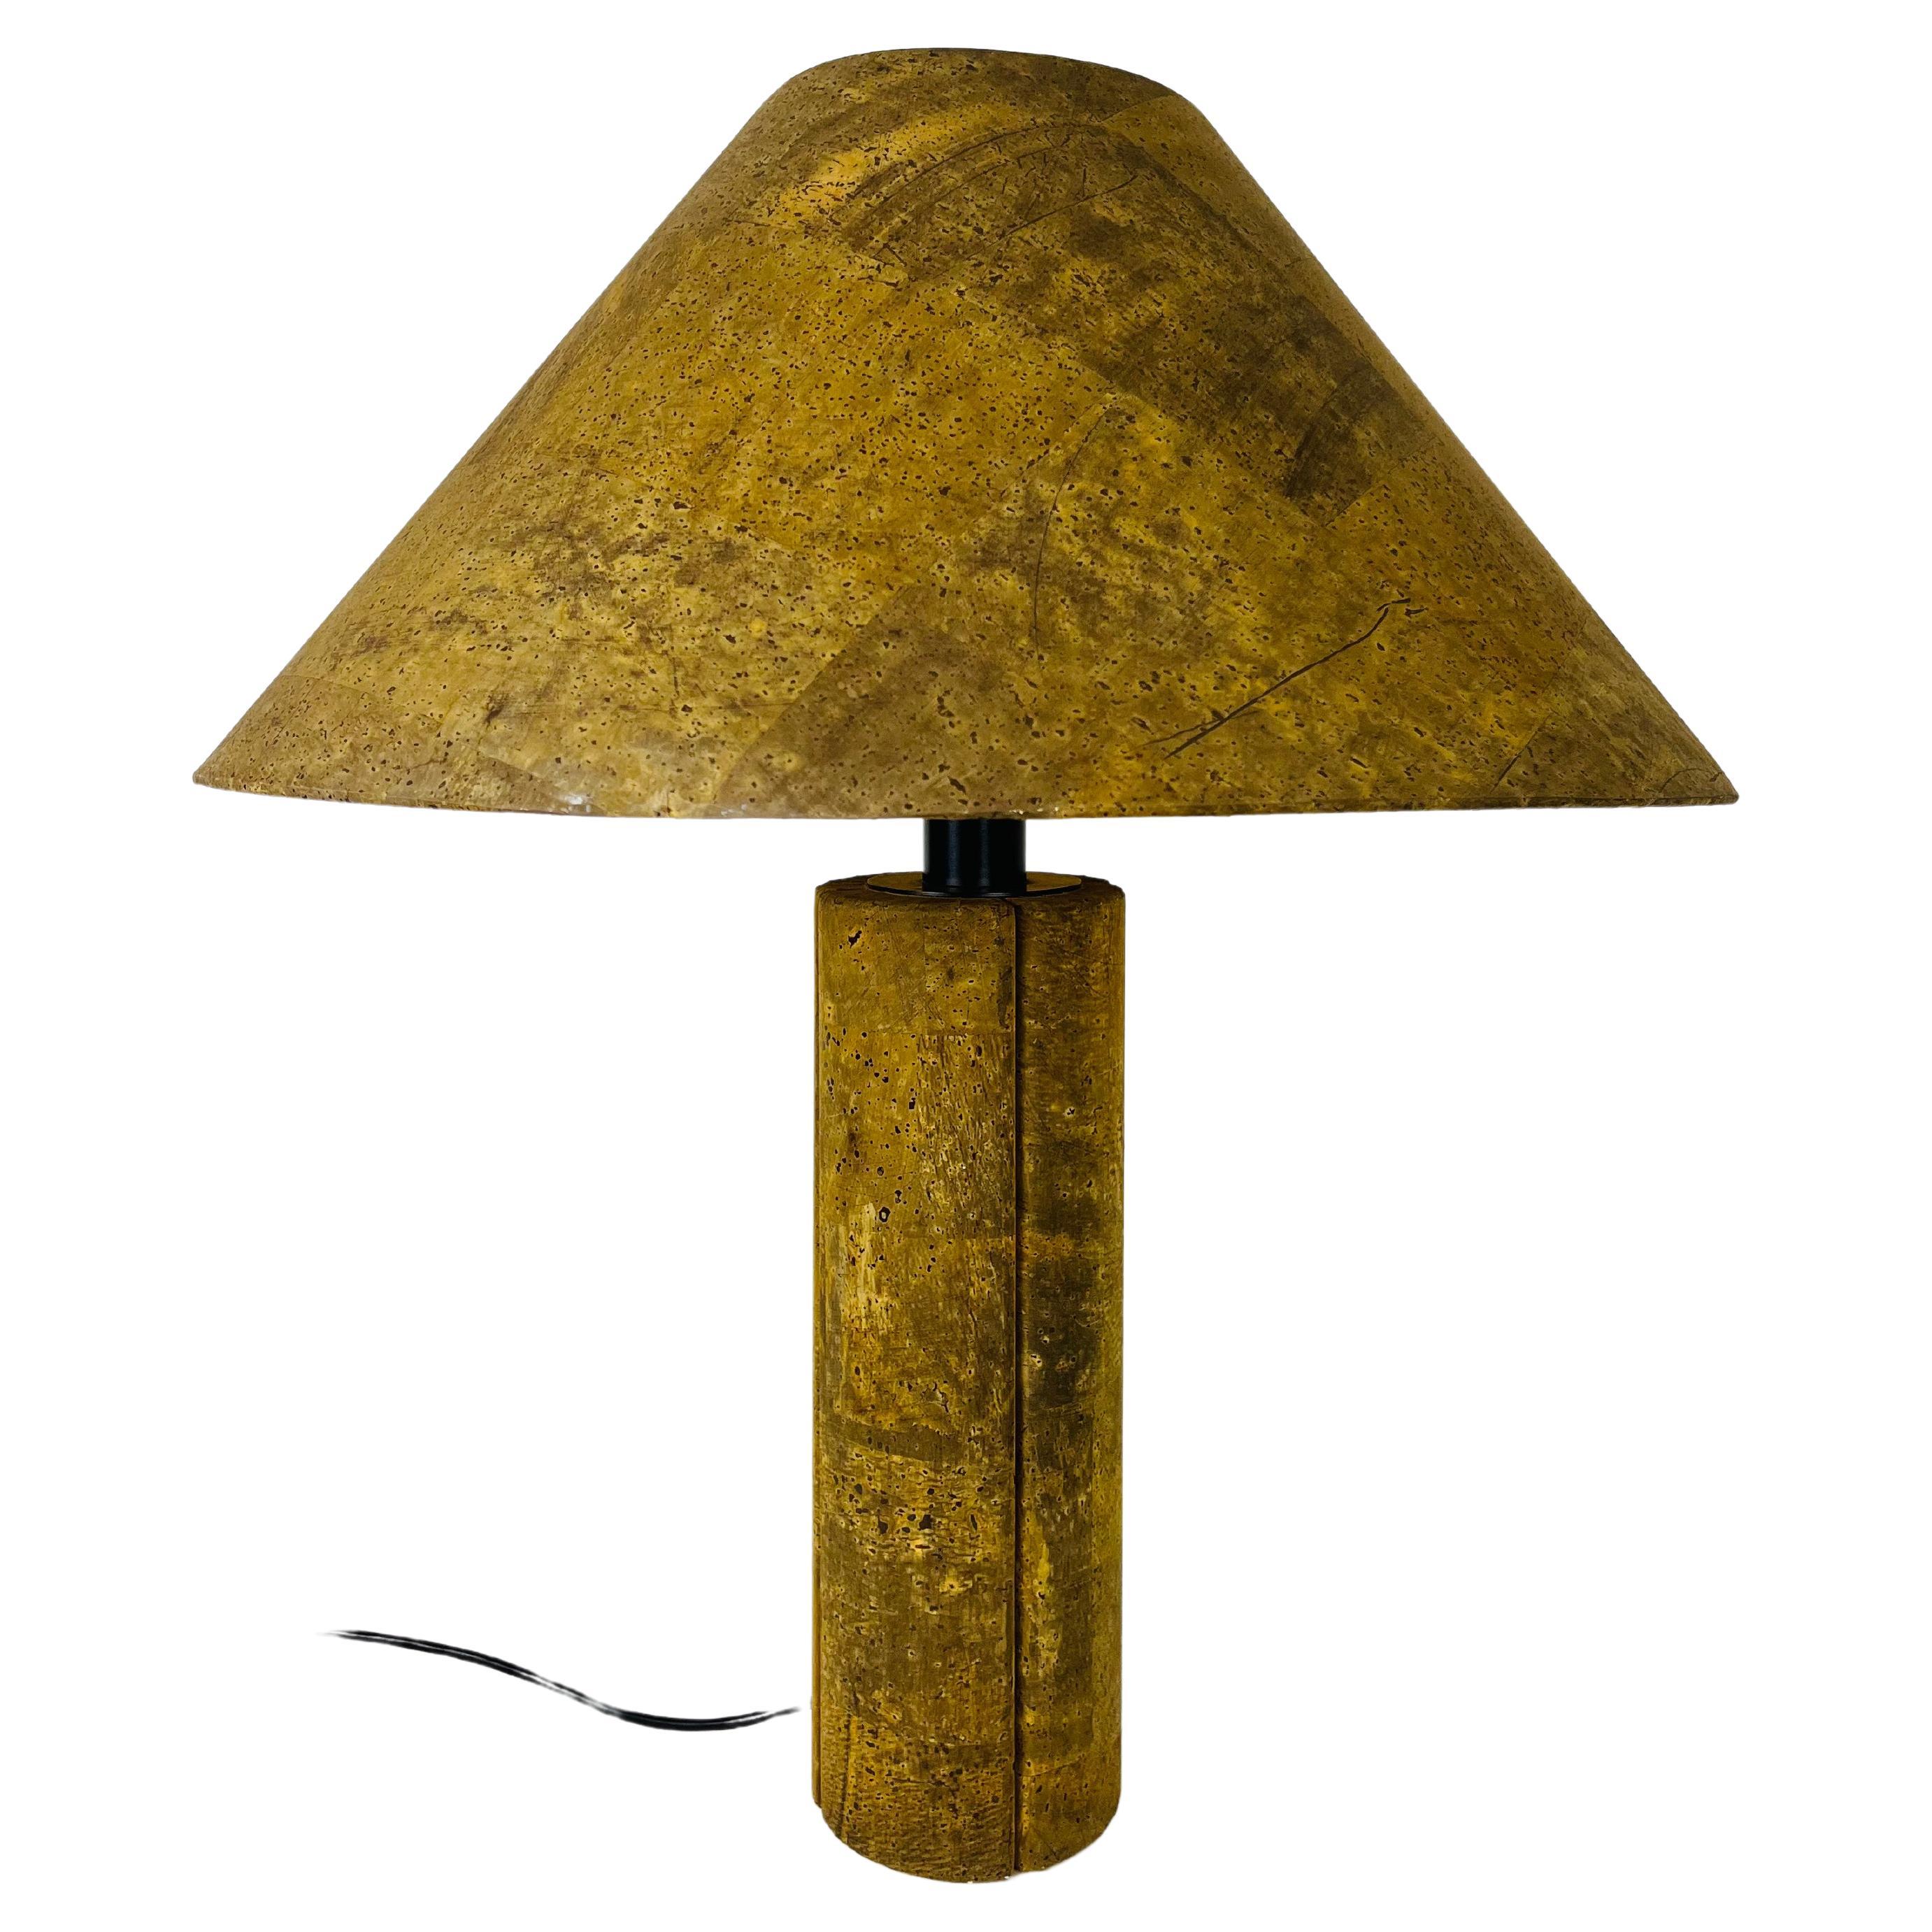 Cork Table Lamp by Ingo Maurer for M Design, 1960s, Germany